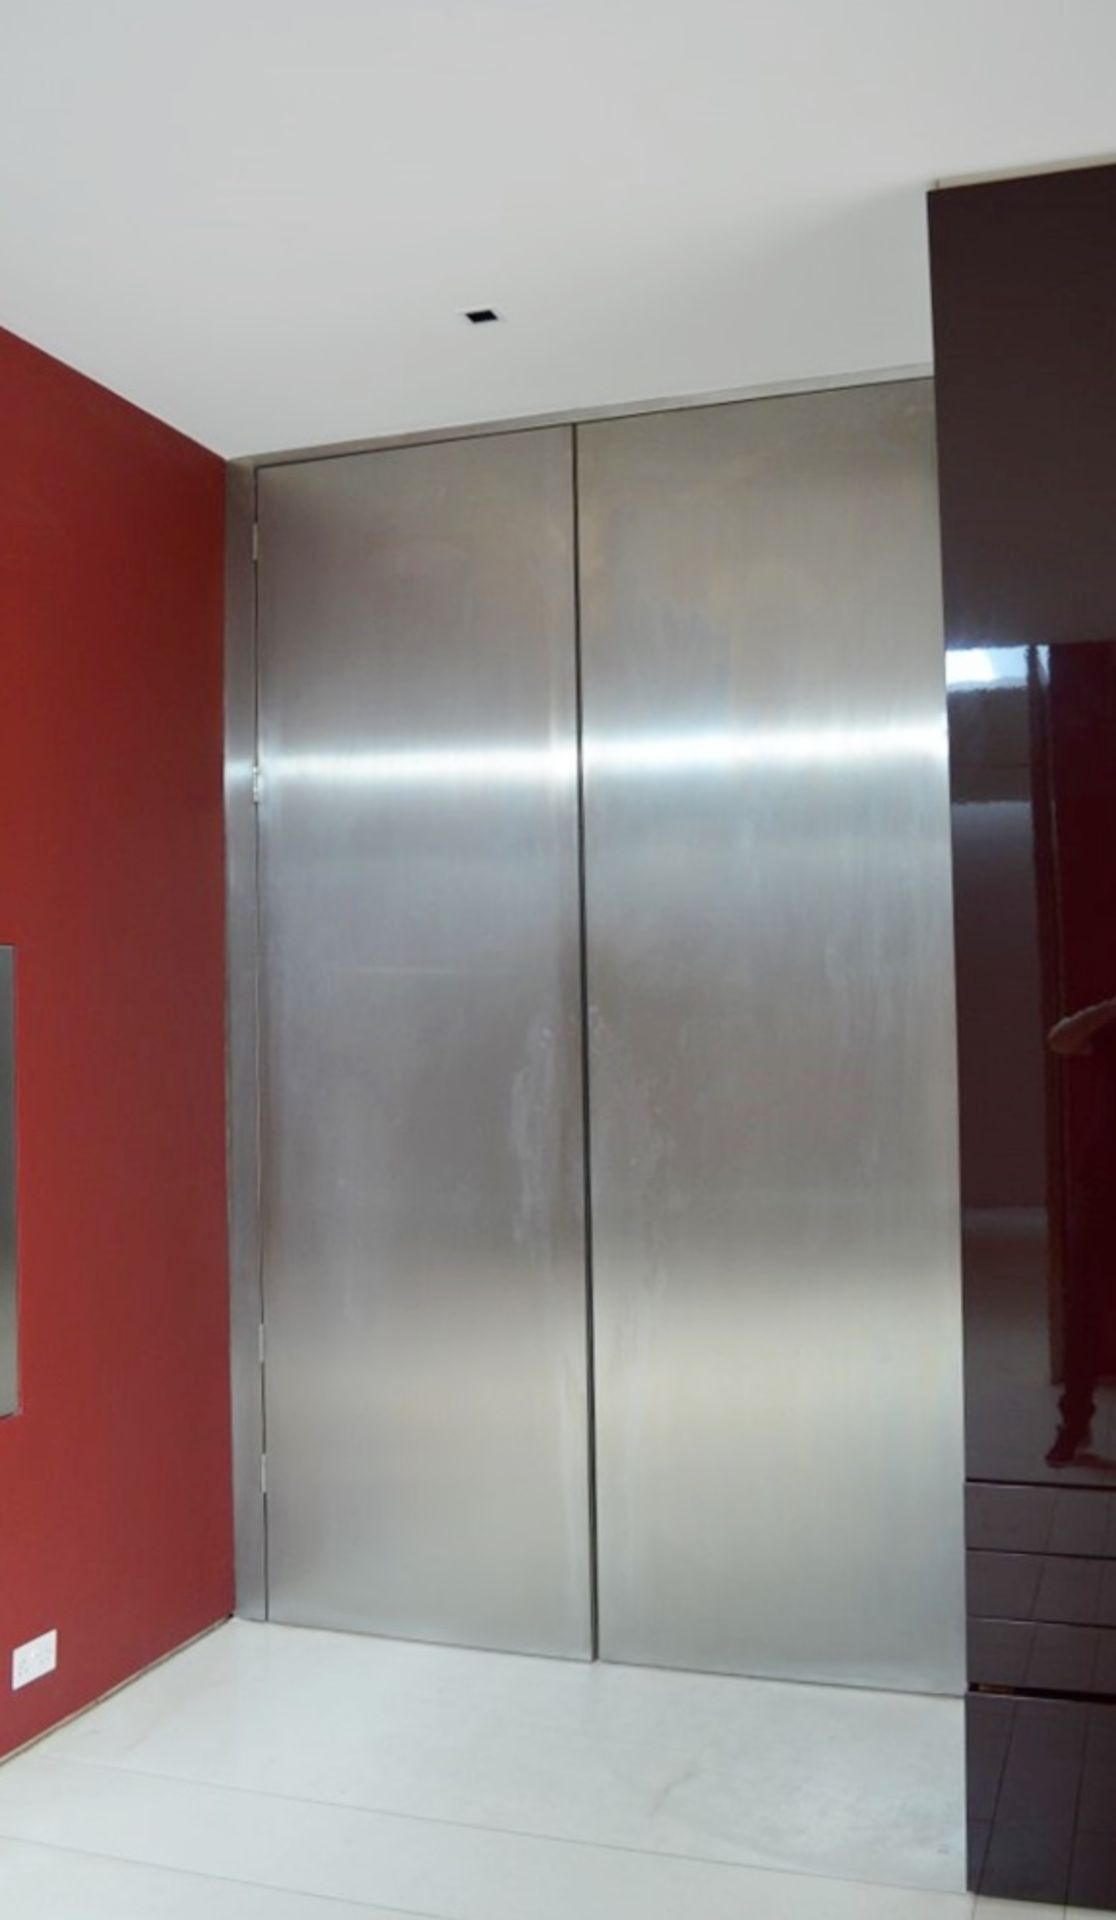 2 x Bespoke Internal Doors With Stainless Steel Finish - Pair of - Large Size - Ideal For Interior - Image 9 of 9